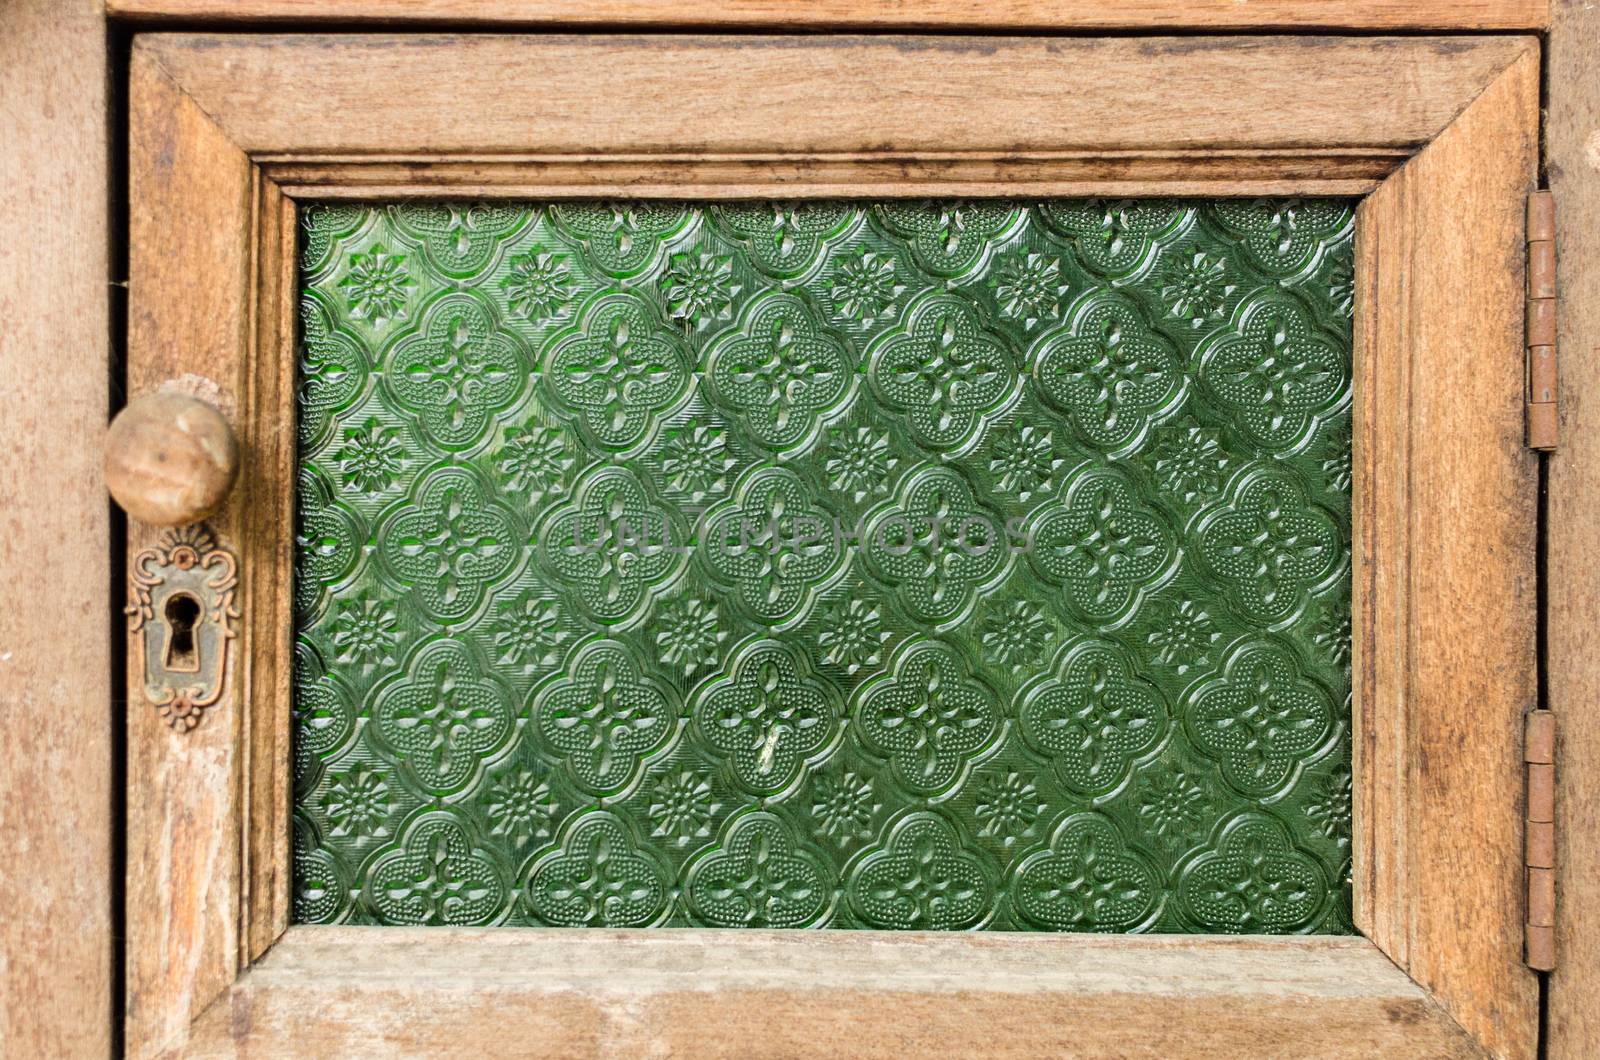 Sheet of glass texture green star pattern for wood window by nopparats